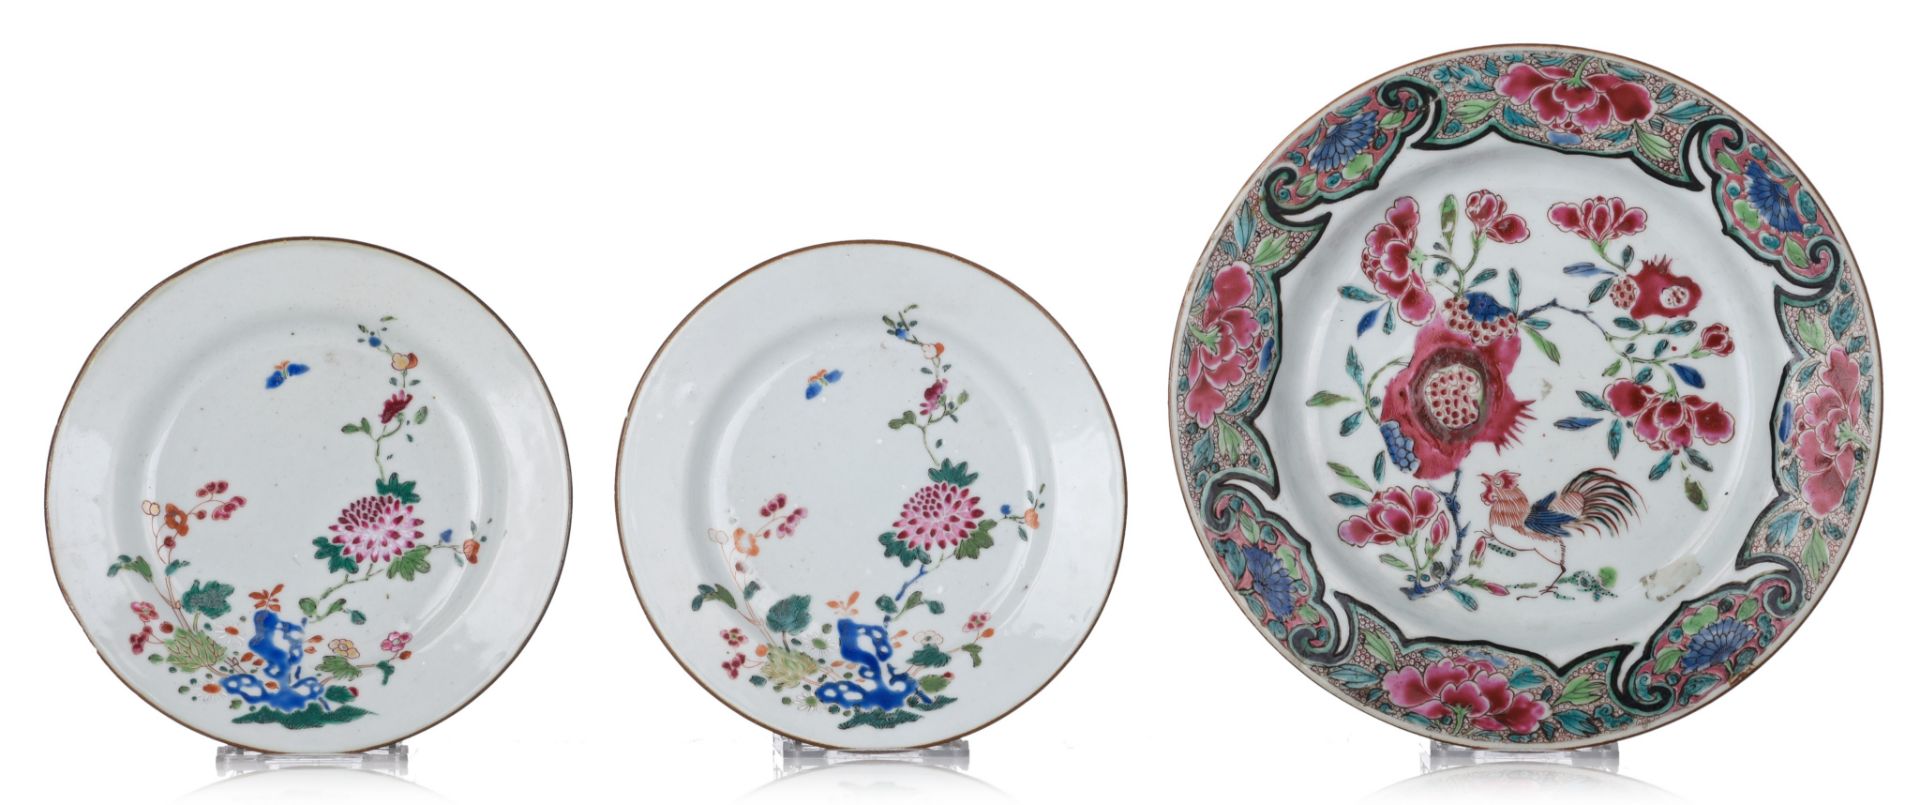 A collection of fine Chinese famille rose export porcelain dishes and a plate, 18thC, largest dimens - Image 5 of 10